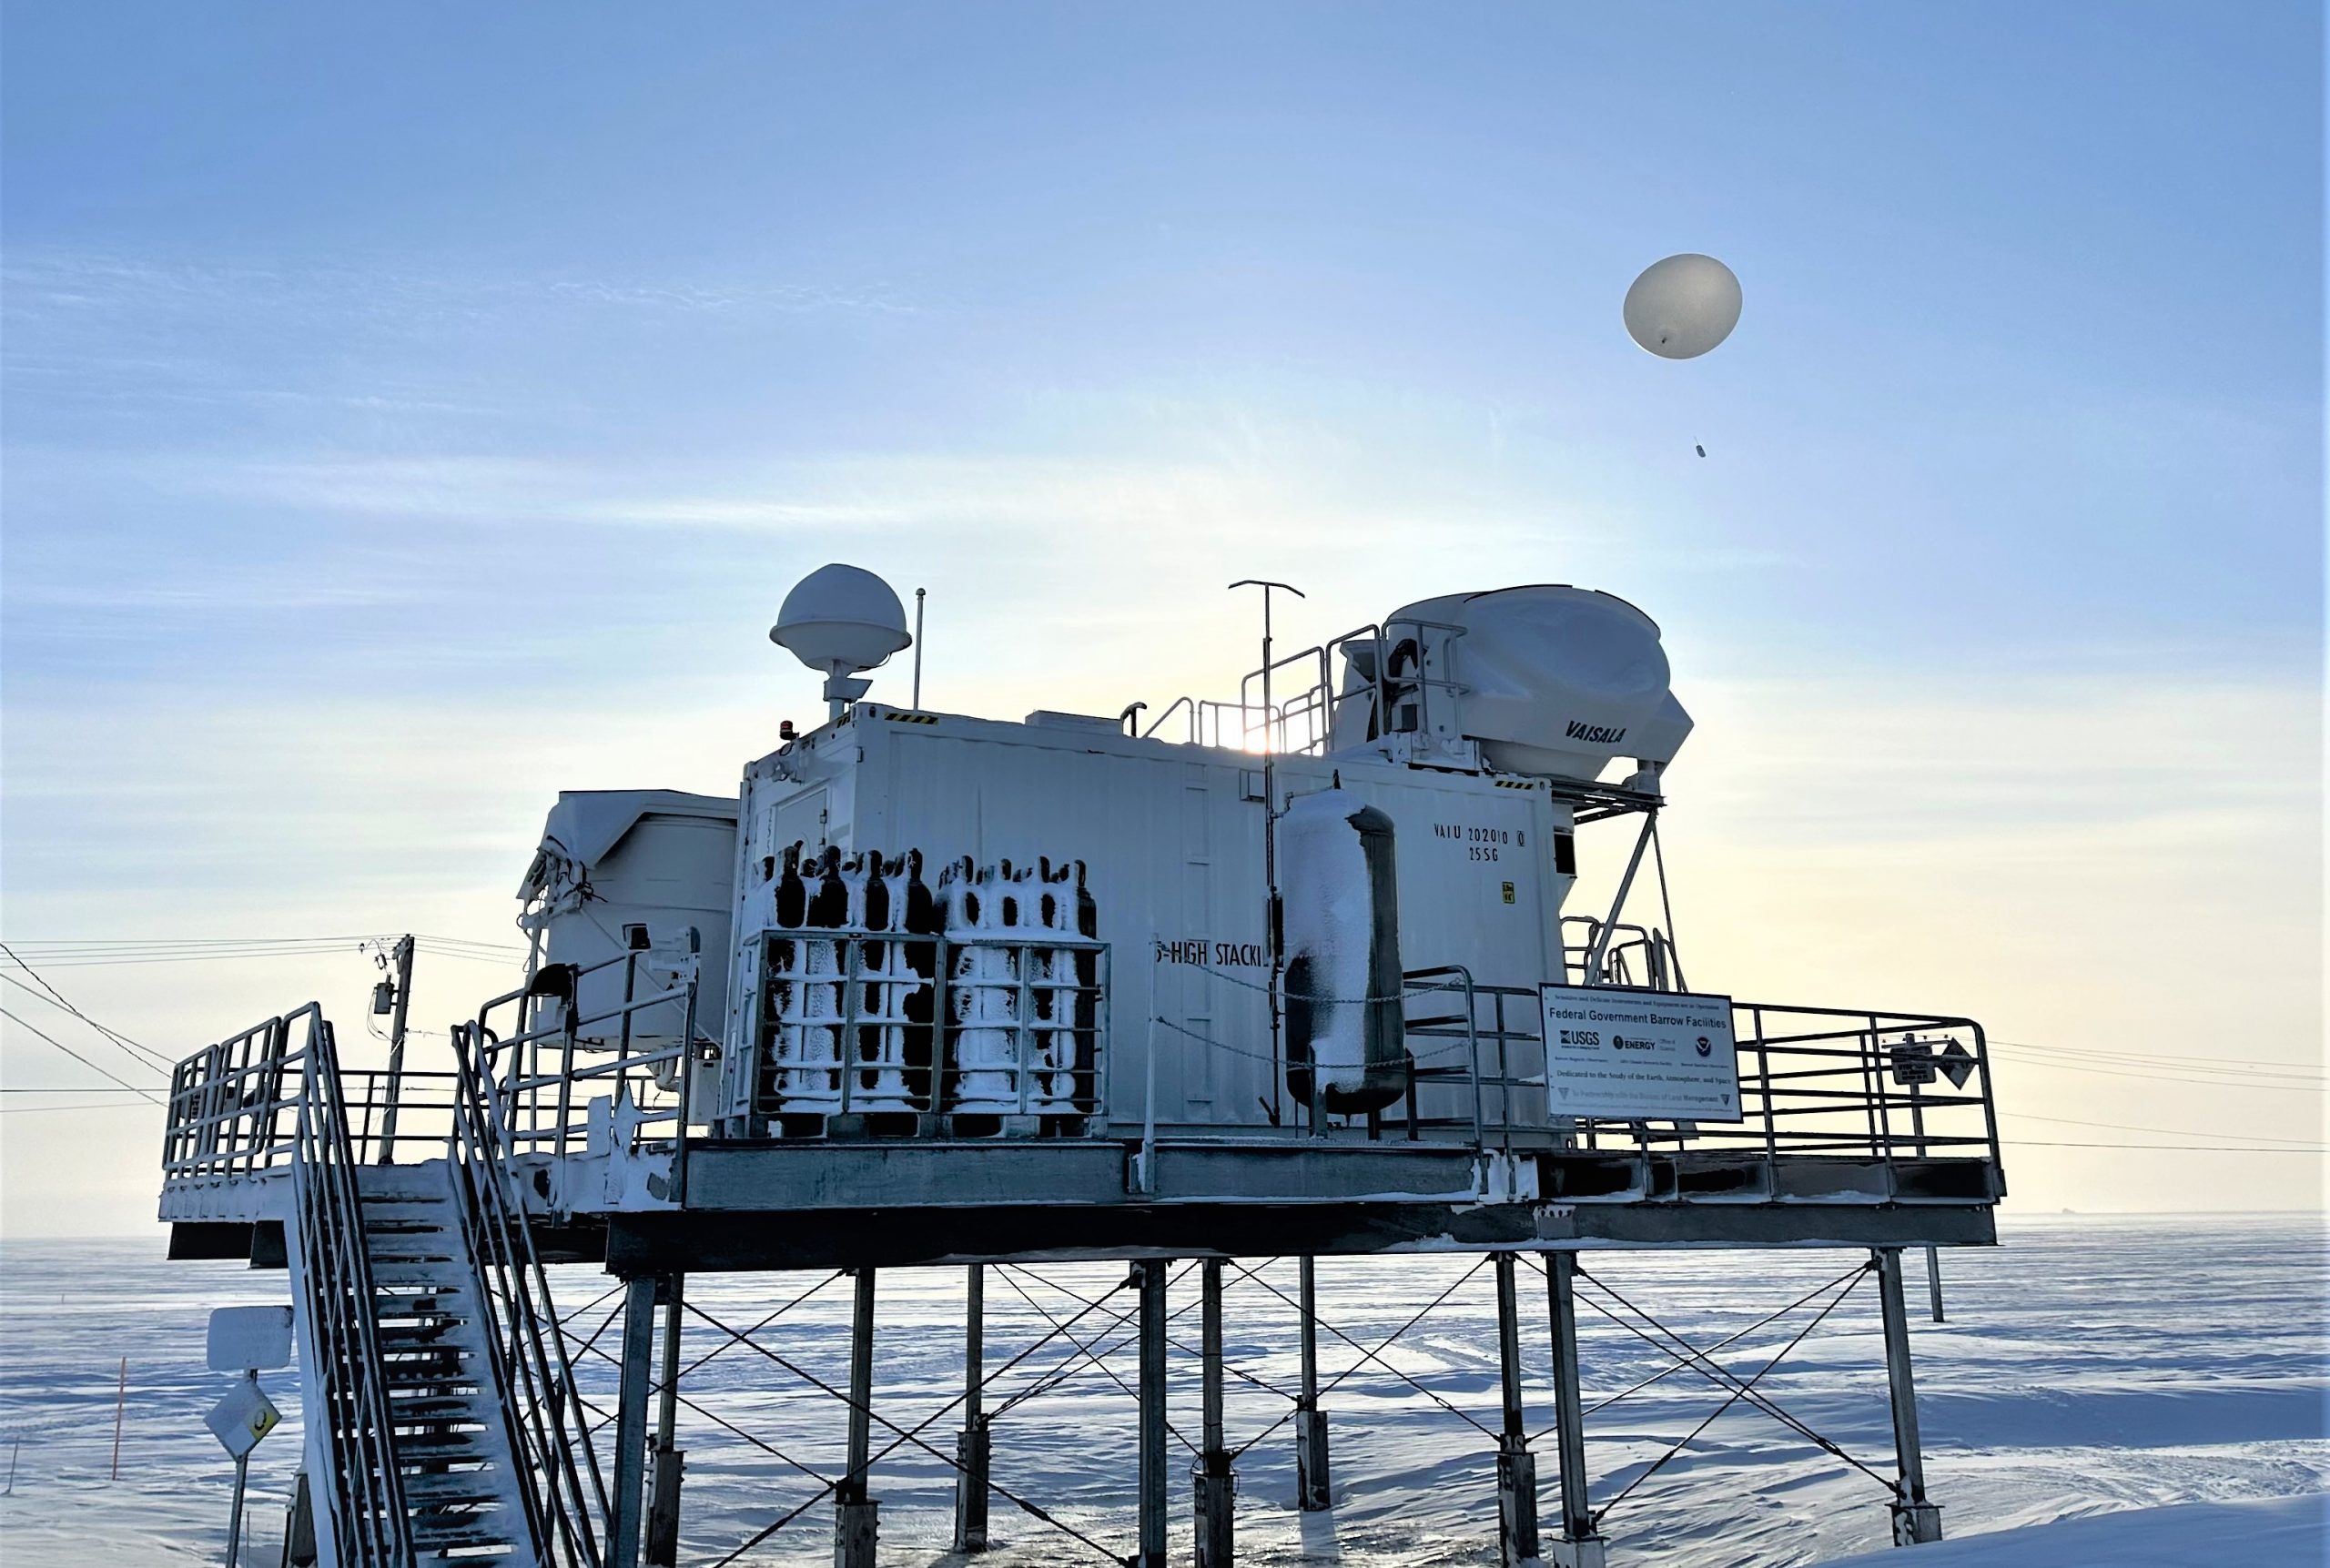 A hydrogen-filled weather balloon launches automatically from a Department of Energy atmospheric measurement facility in Utqiaġvik, formerly known as Barrow. About three years ago, Sandia National Laboratories switched from launching helium-filled balloons to launching hydrogen-filled balloons to reduce costs and carbon emissions. (Photo by Ben Bishop)